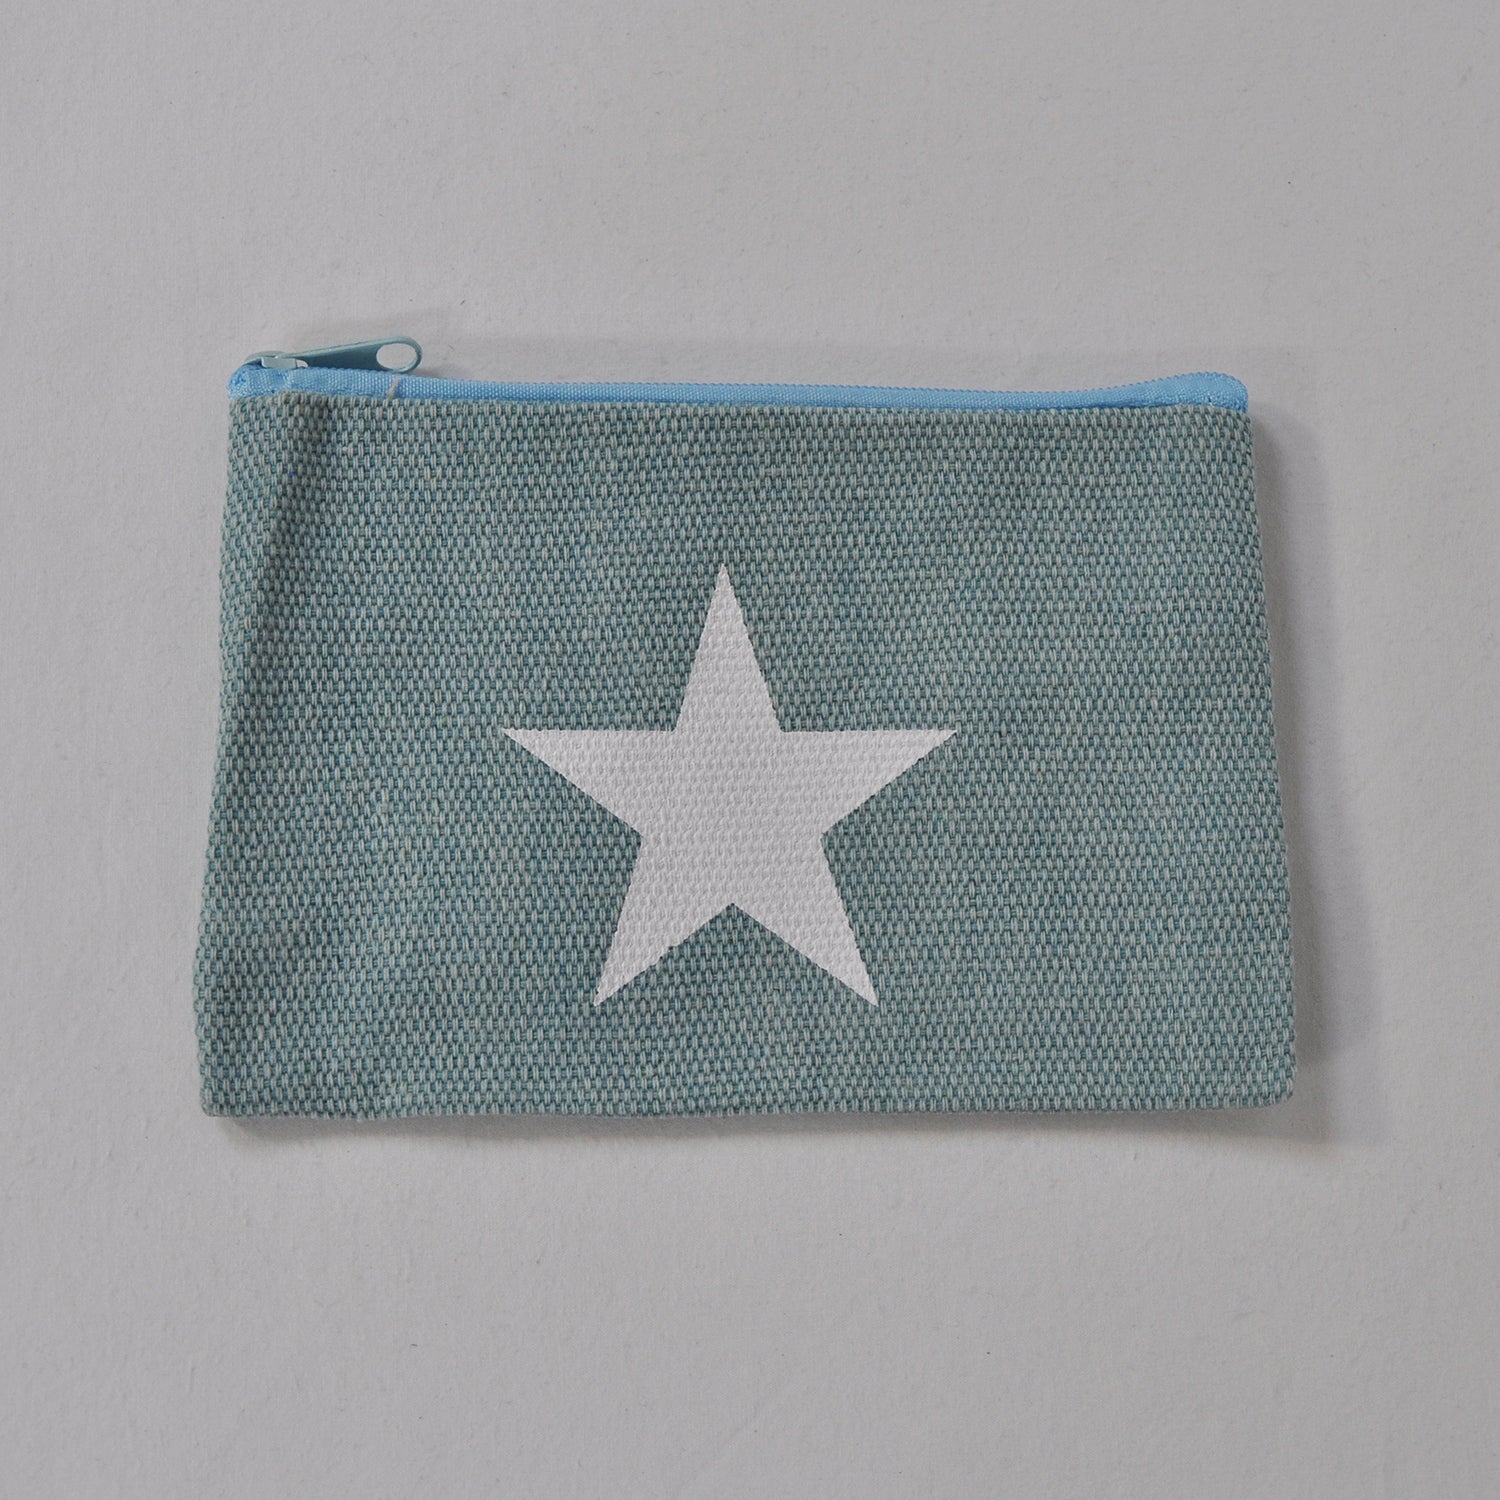 Turquoise star wallet